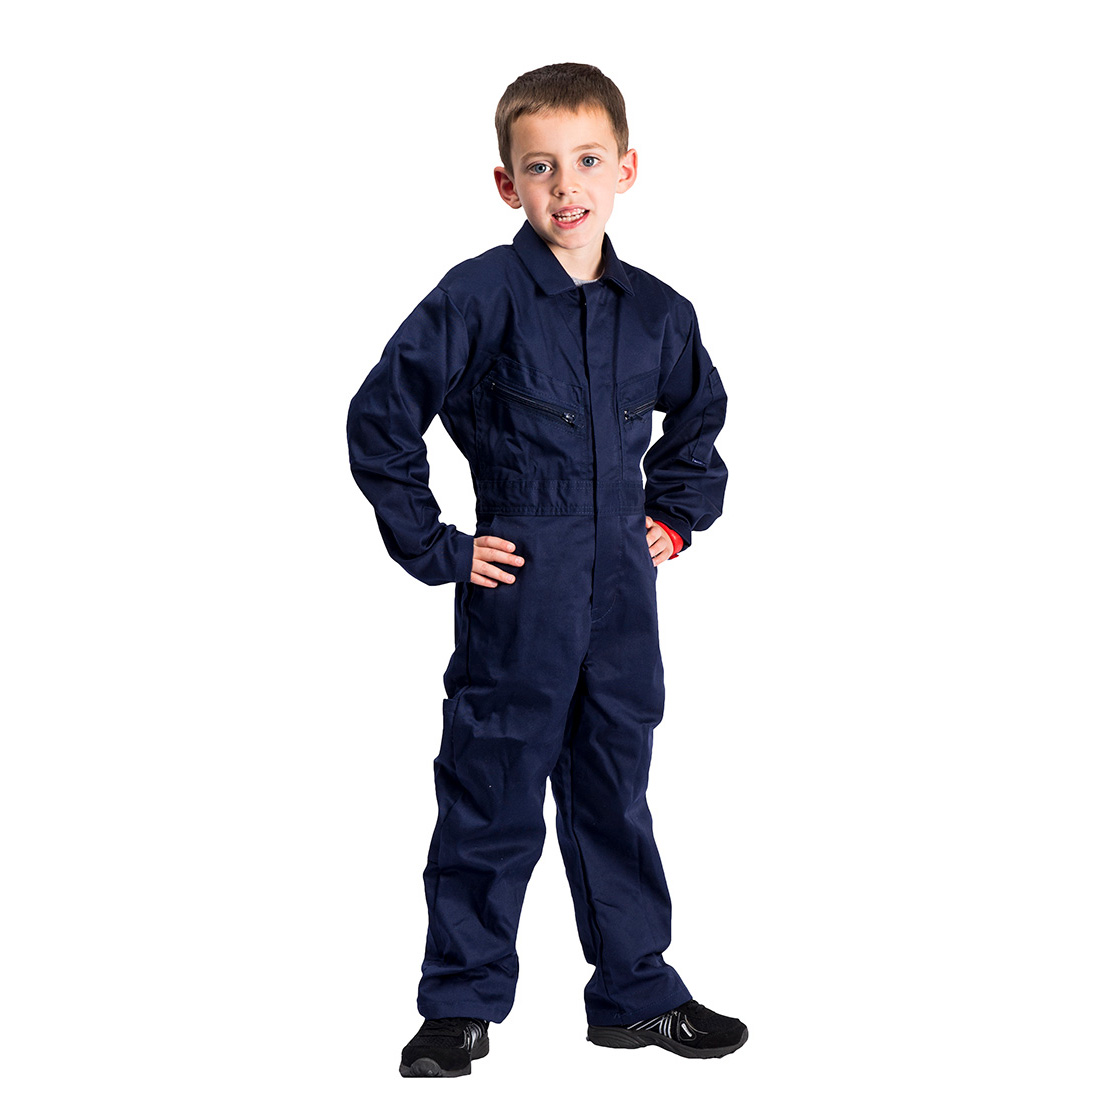 Functional Mechanic Youth's Coverall